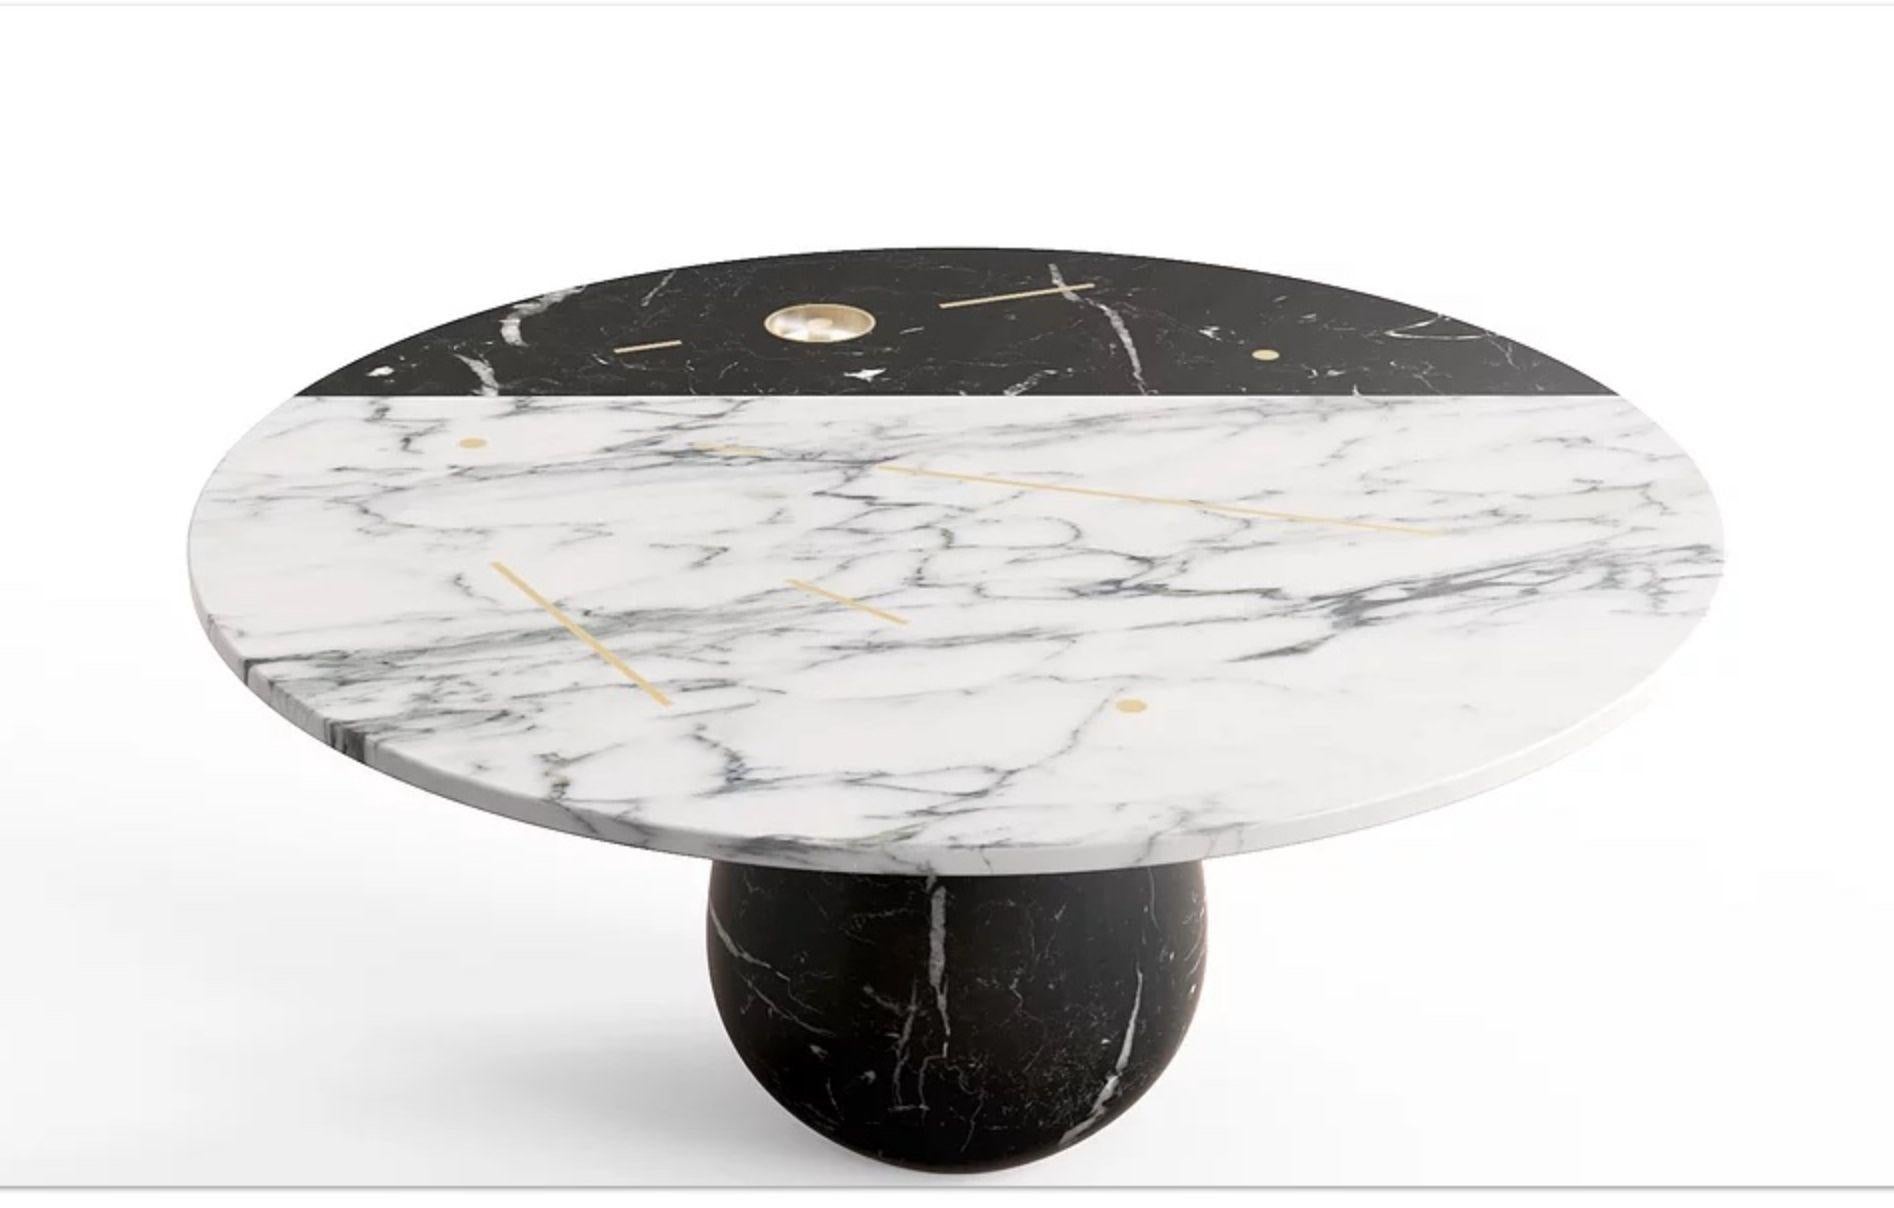 Stilla marble table by Marmi Serafini
Materials: Nero Marquinia, arabescato carrara, brass, resin
Dimensions: Ø 160, H 75 cm.



Stilla is a round table which top, embroidered by simple and geometrical features, gives life to an elegant